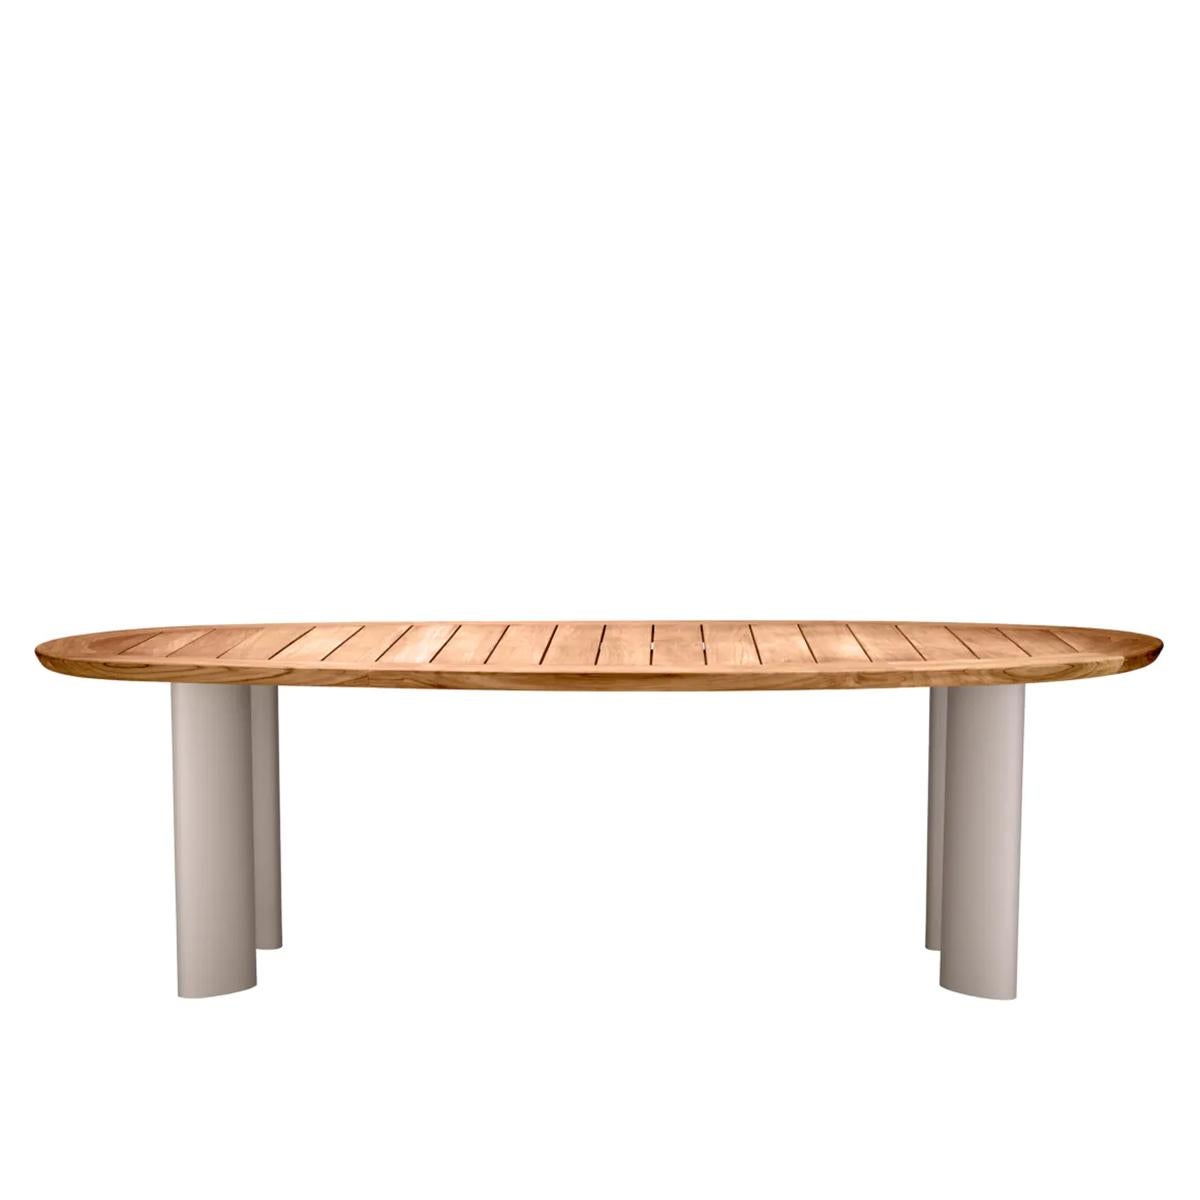 Indonesian Teeko Outdoor Dining Table For Sale